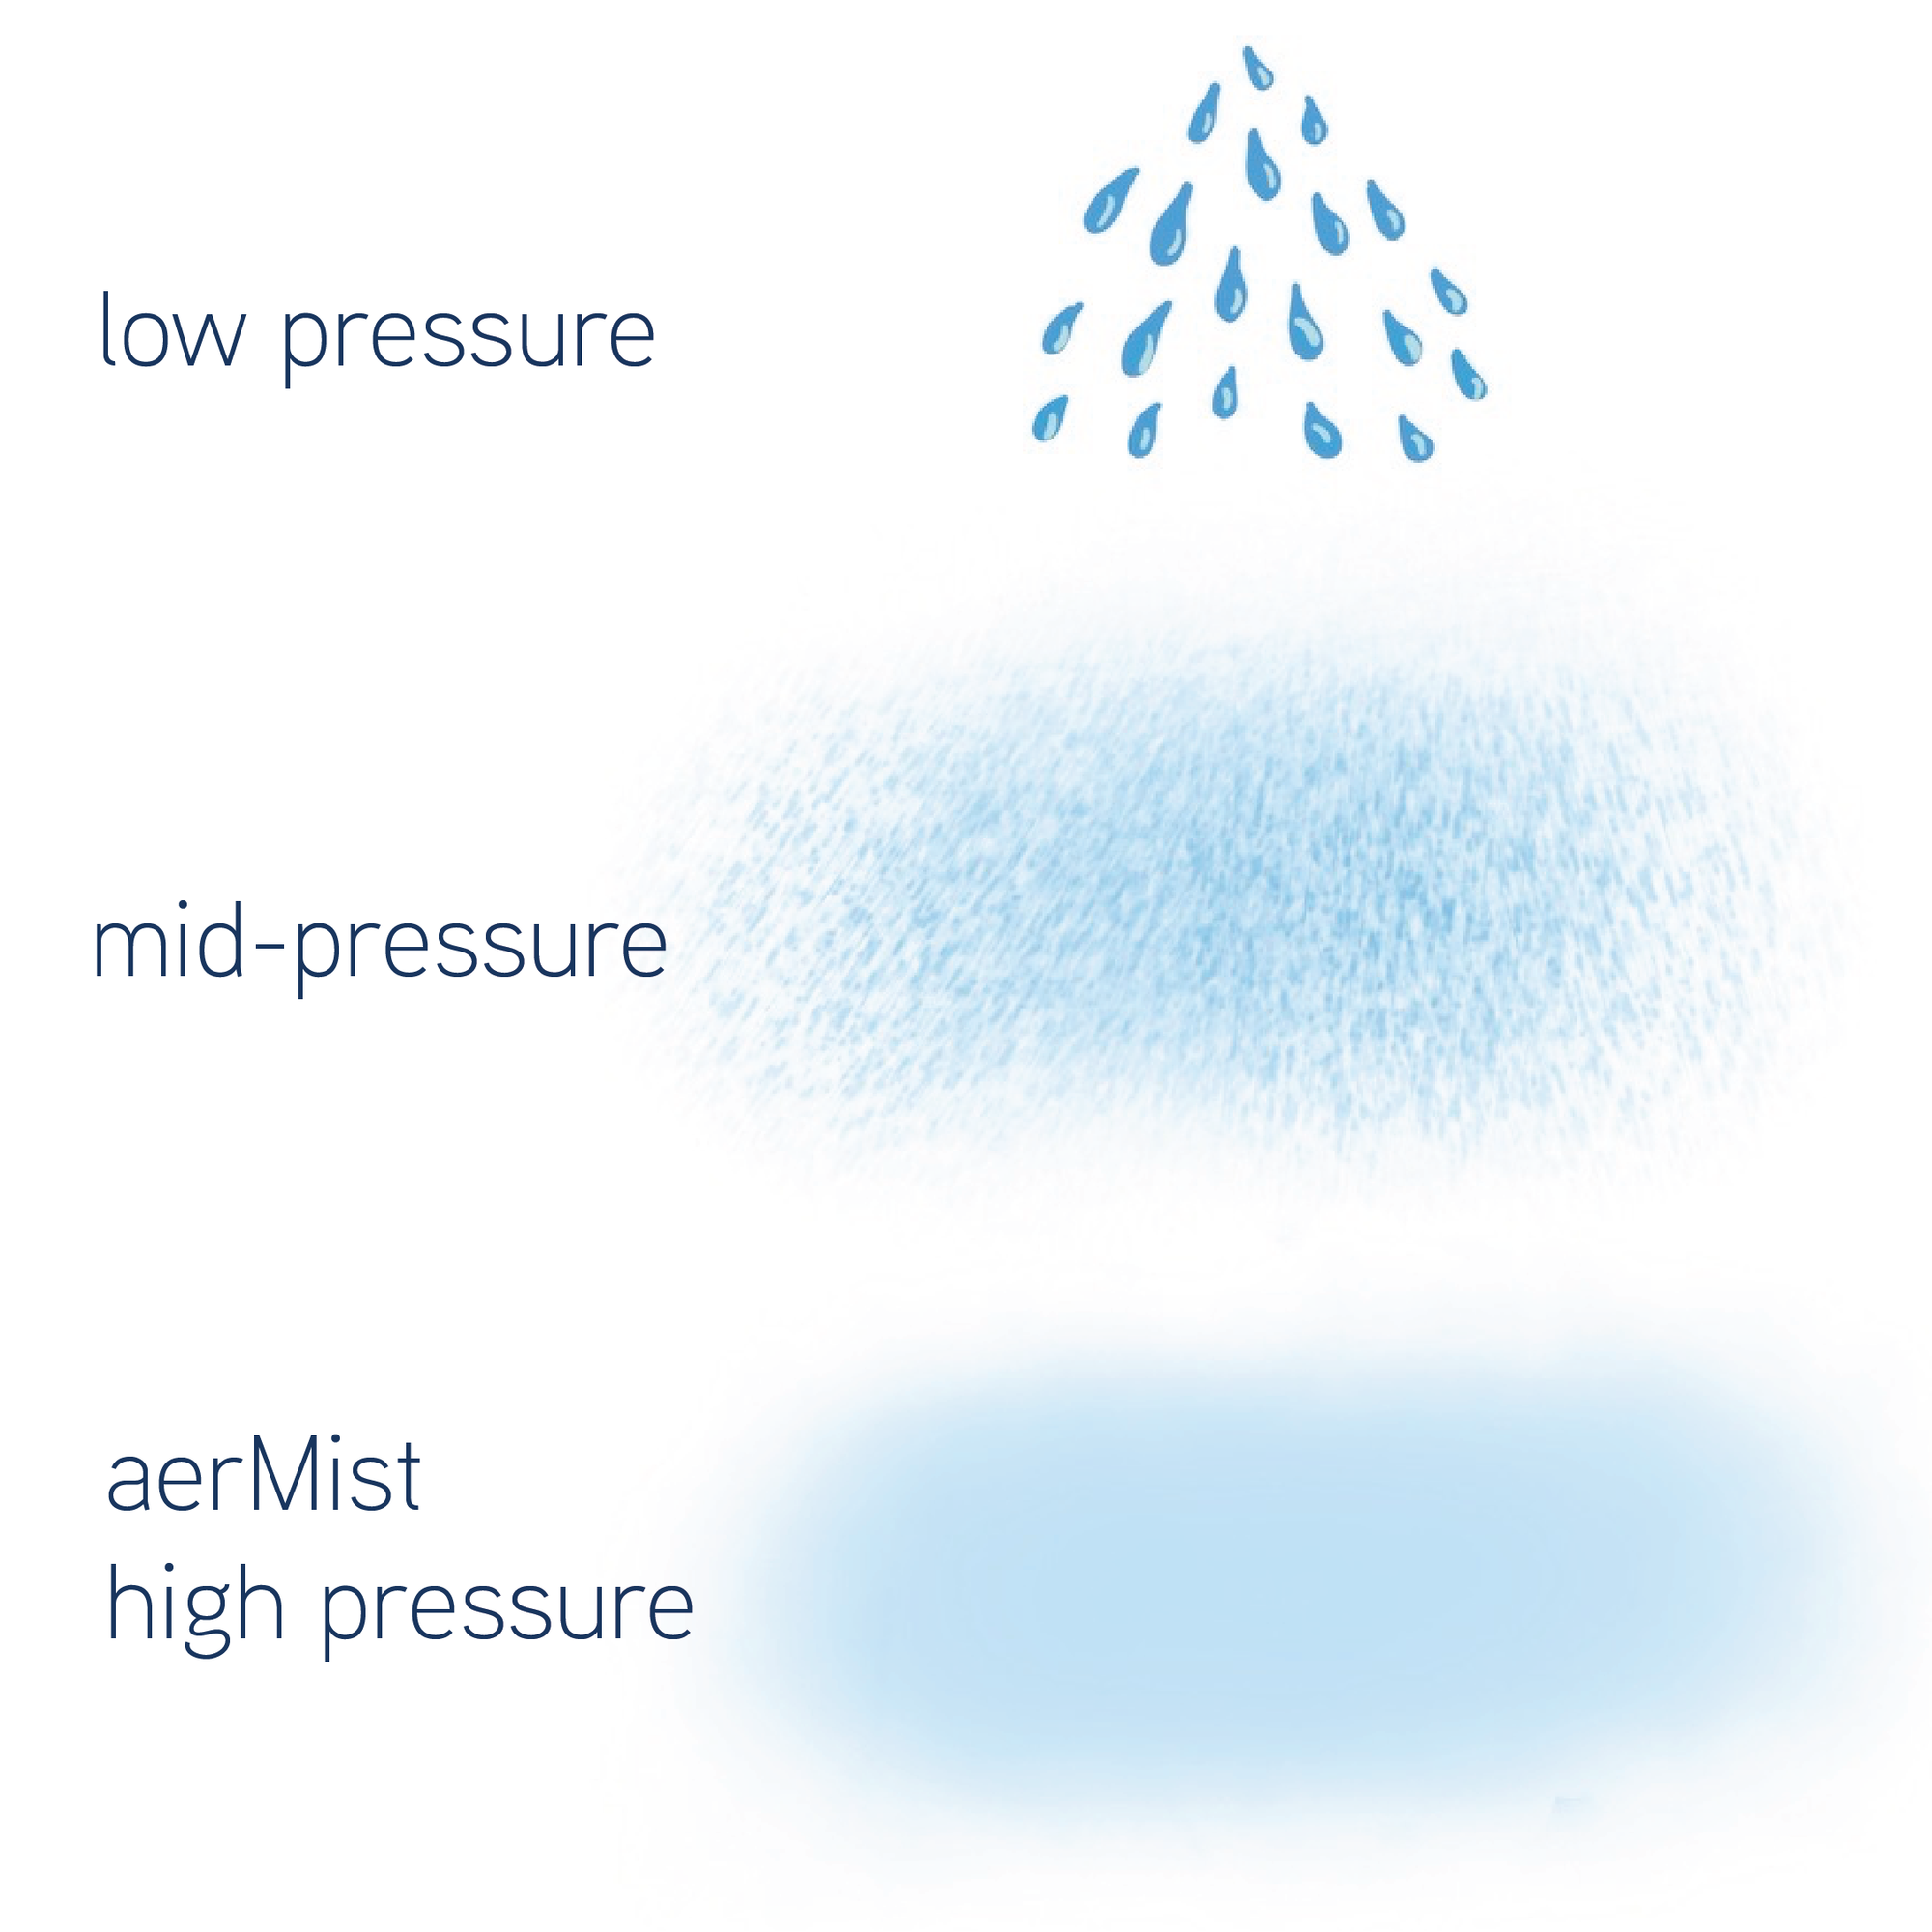 aerMist high pressure misting systems create super fine mist when compared to low and mid pressure systems